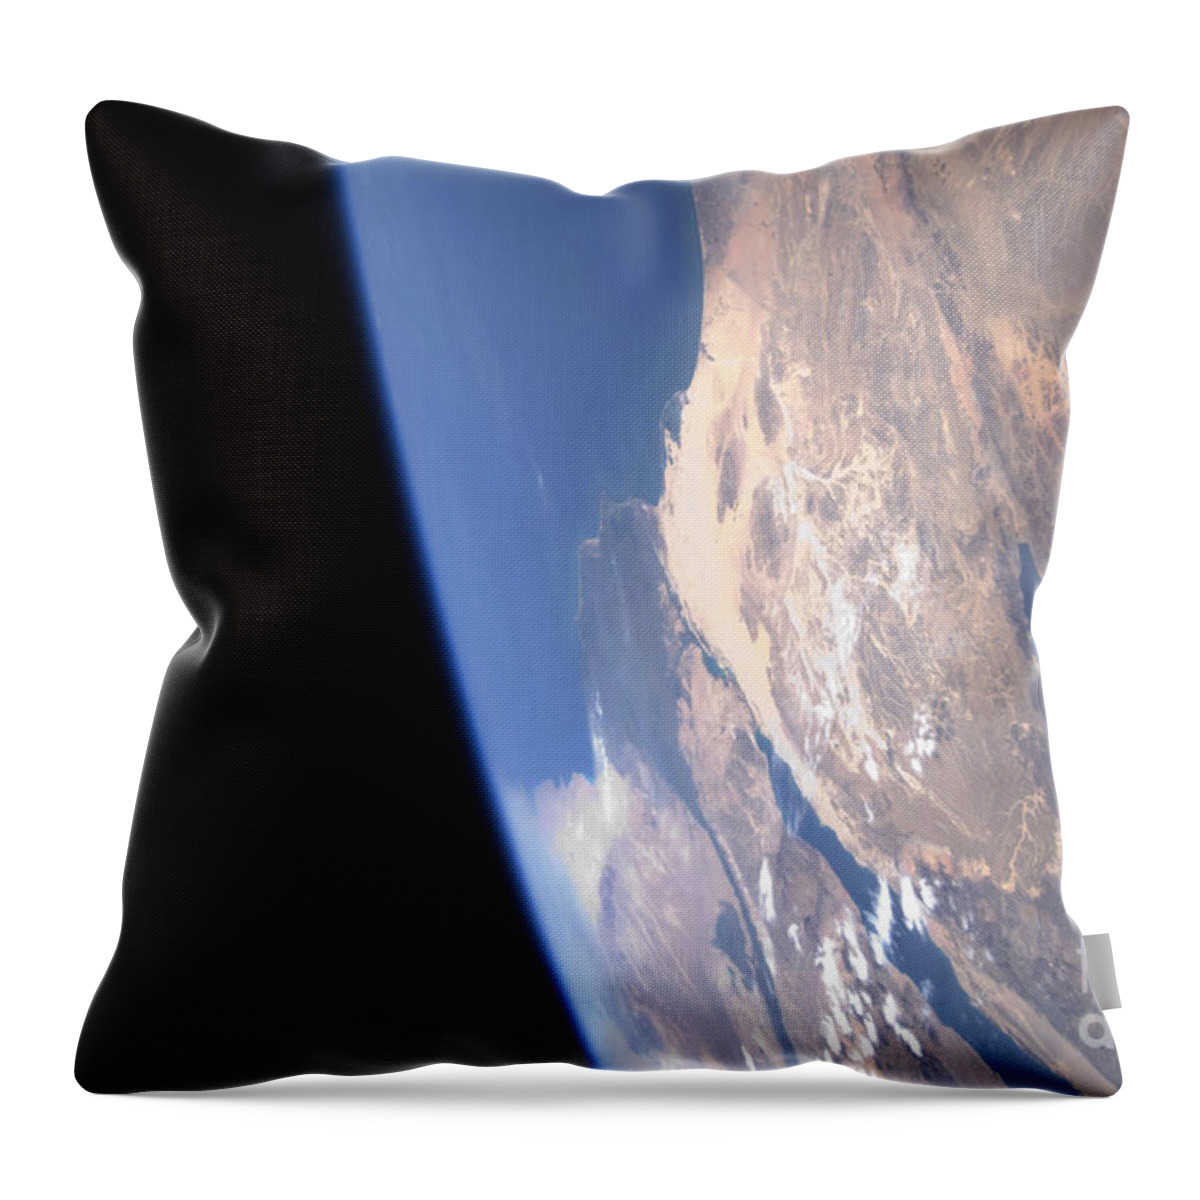 Landmass Throw Pillow featuring the photograph High Oblique Scene Looking by Stocktrek Images